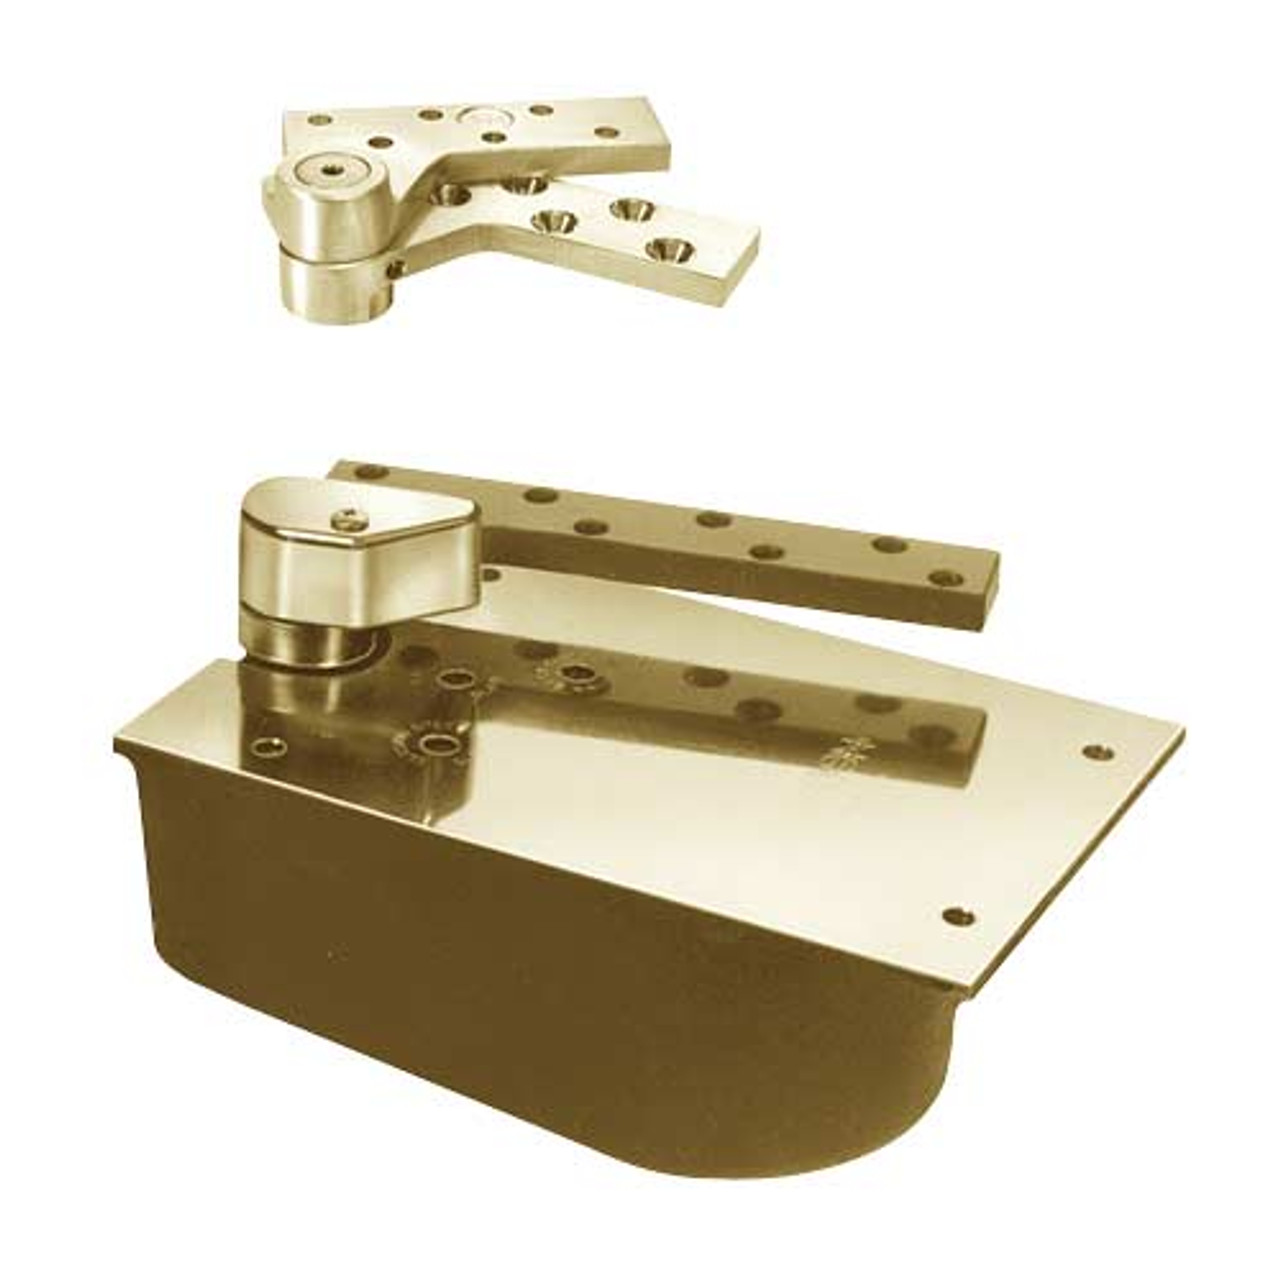 L27-85N-LFP-LH-2-1/4-606 Rixson 27 Series Extra Heavy Duty Lead Lined Offset Floor Closer in Satin Brass Finish